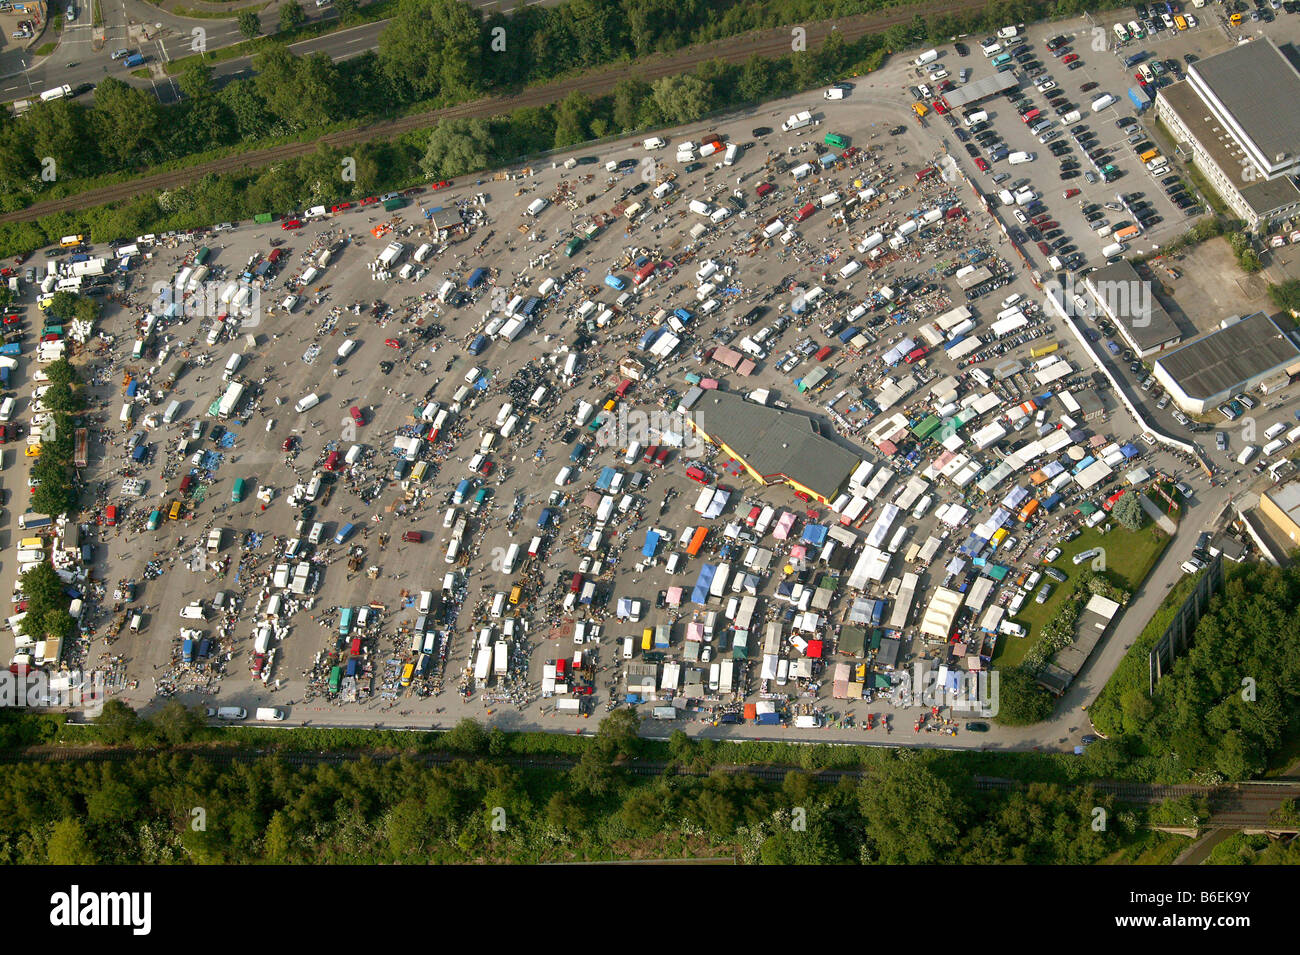 Aerial picture, car trade, market for second-hand cars on the Borbecker drive-in cinema grounds, Essen, Ruhr area, North Rhine- Stock Photo